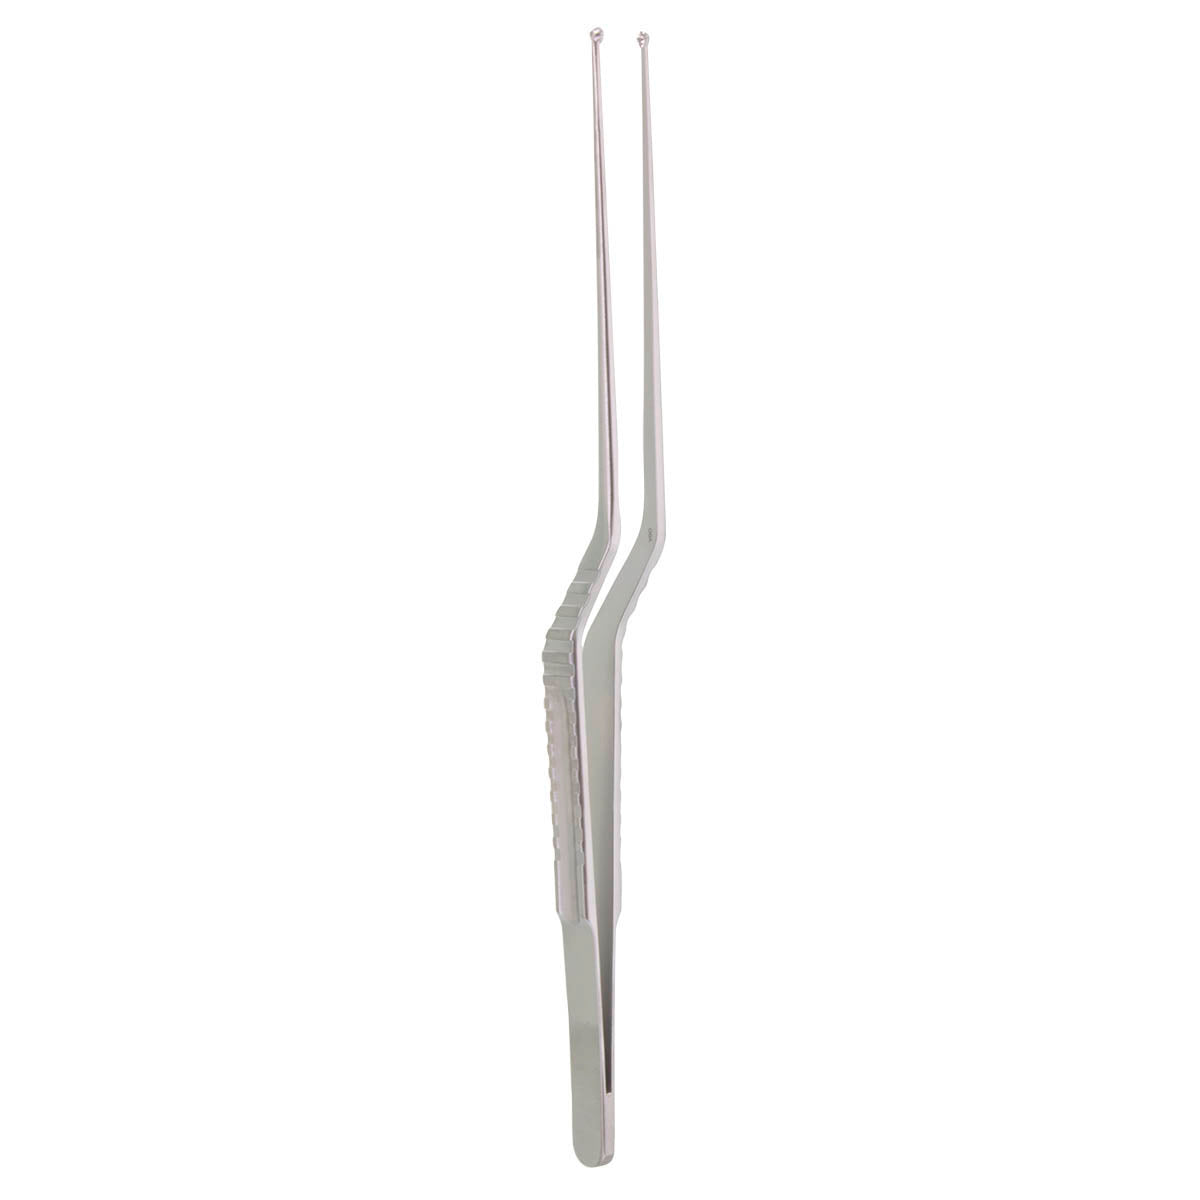 Yasargil Tumor Forceps  Cupped Serrated 3mm